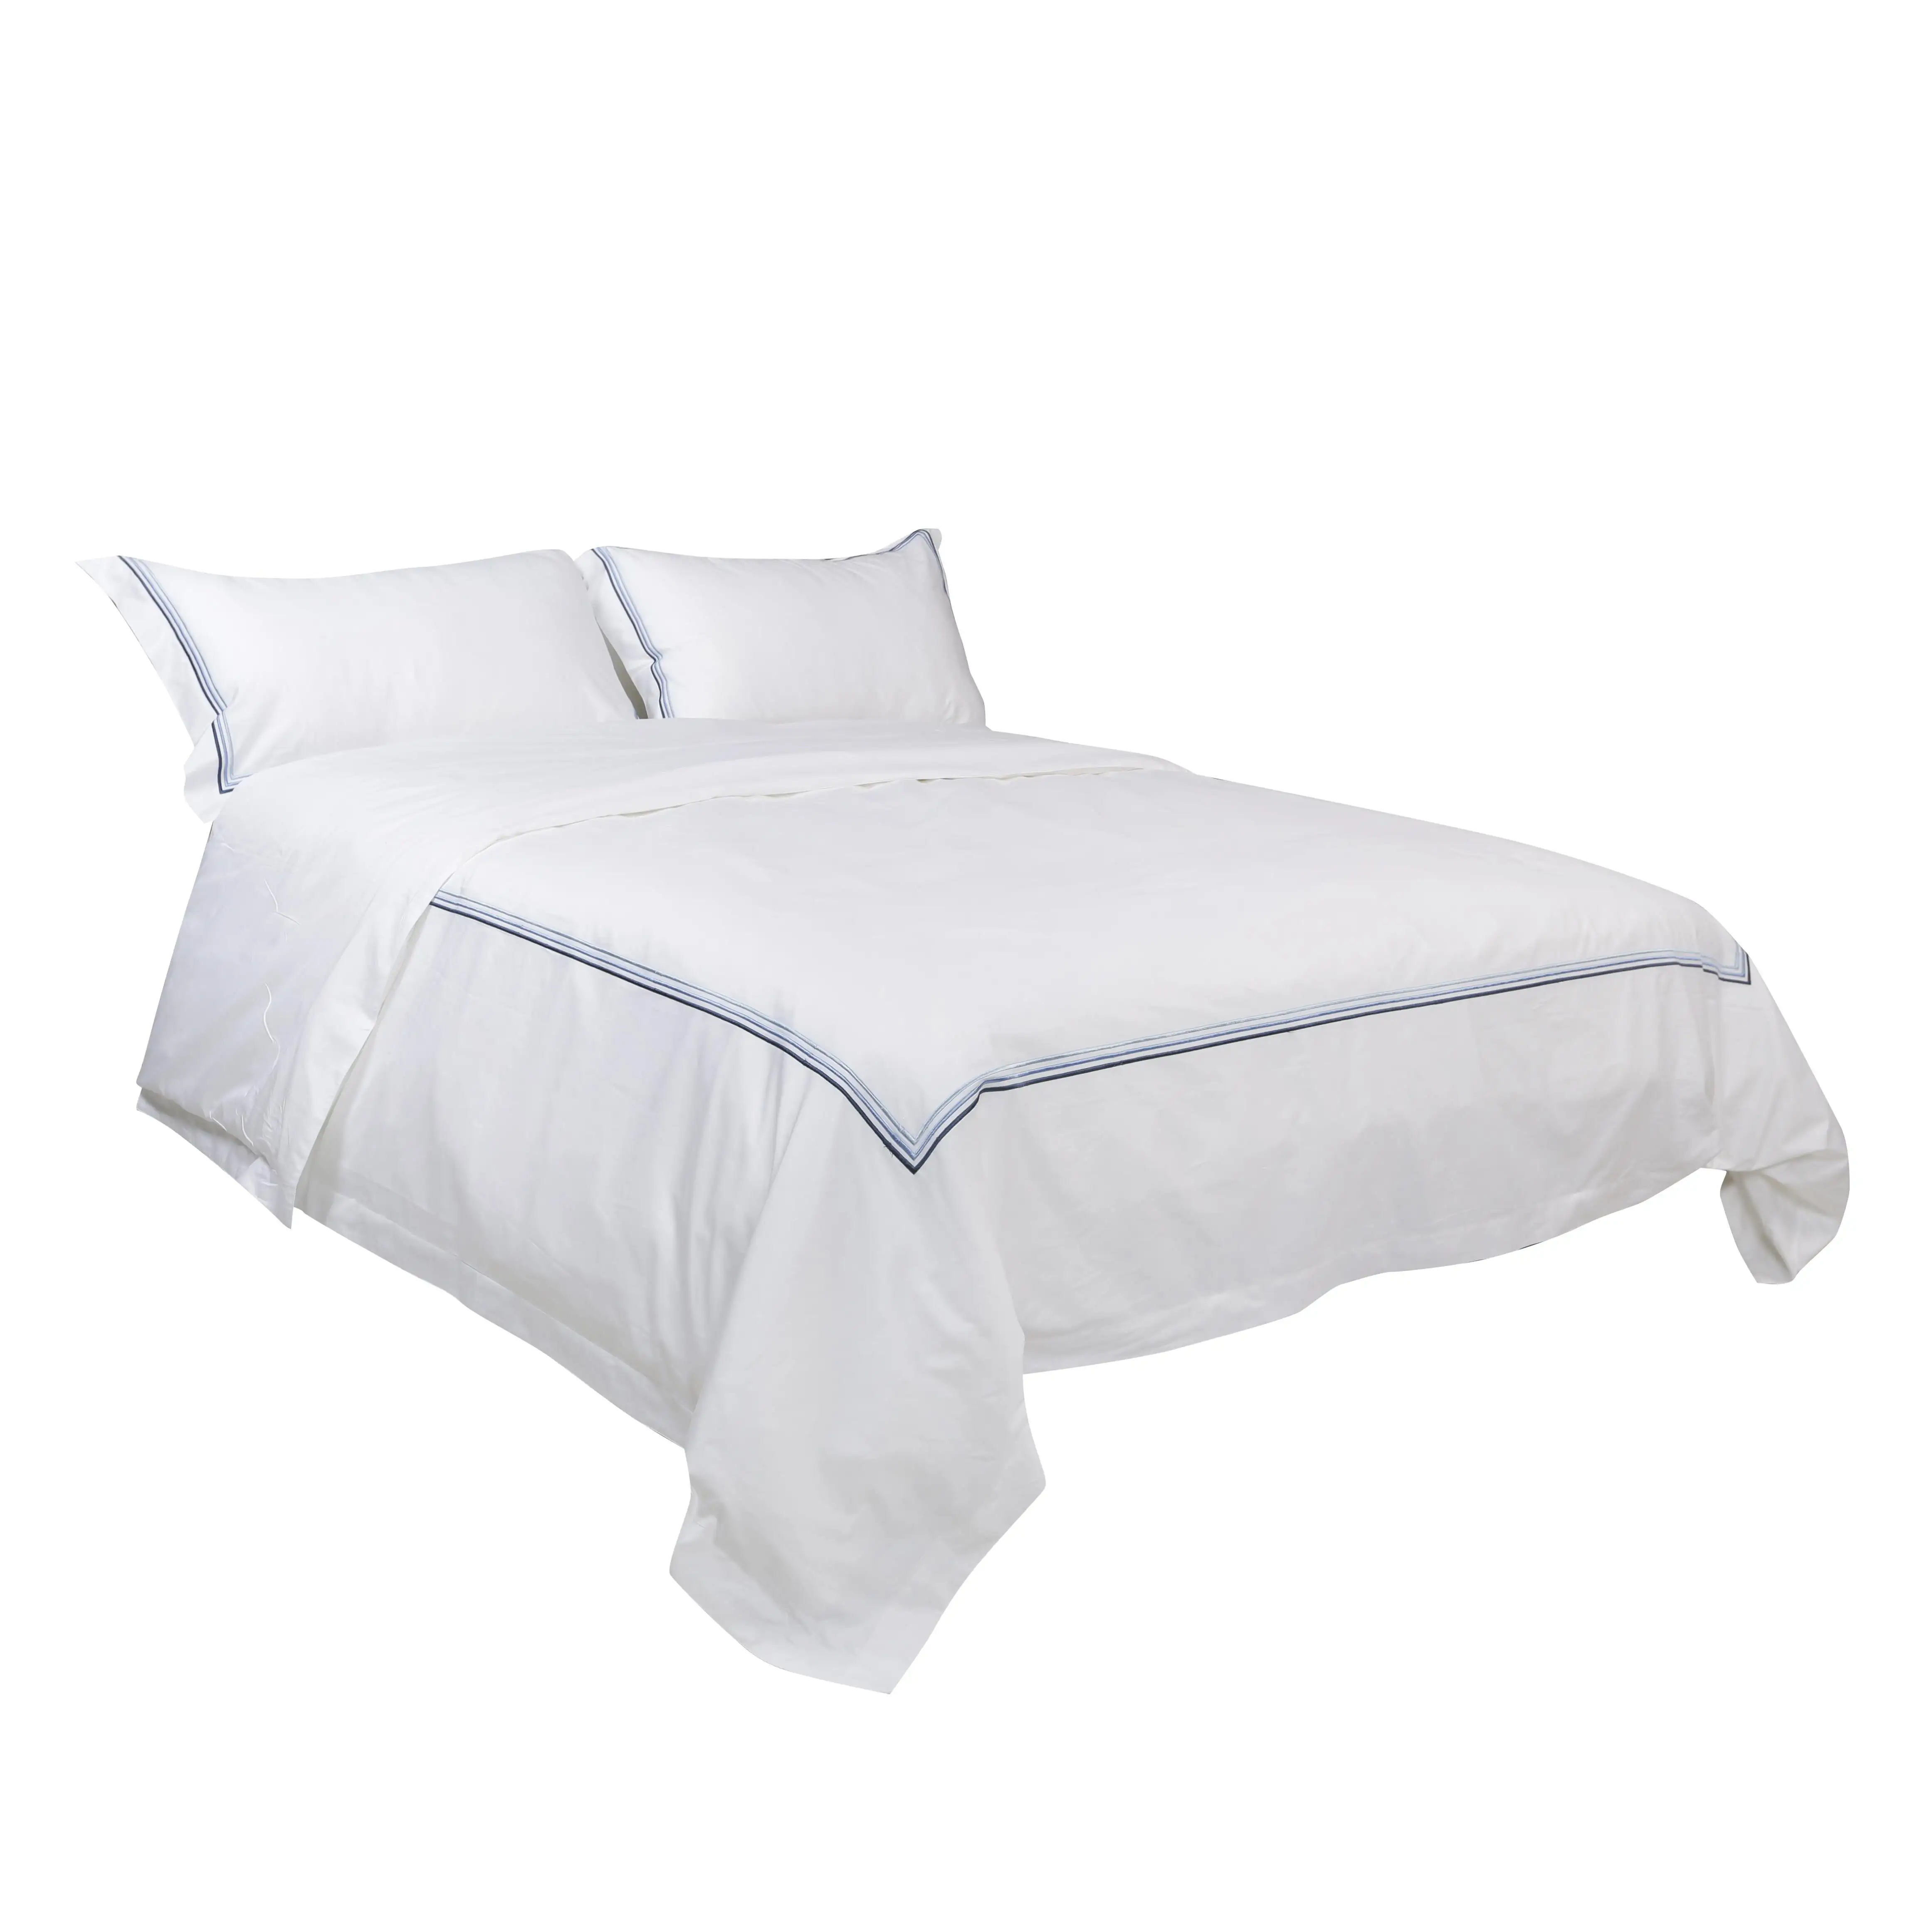 Luxury hotel used Hotel Duvet Covers and Adults Age Group embroidered bedding with competitive price